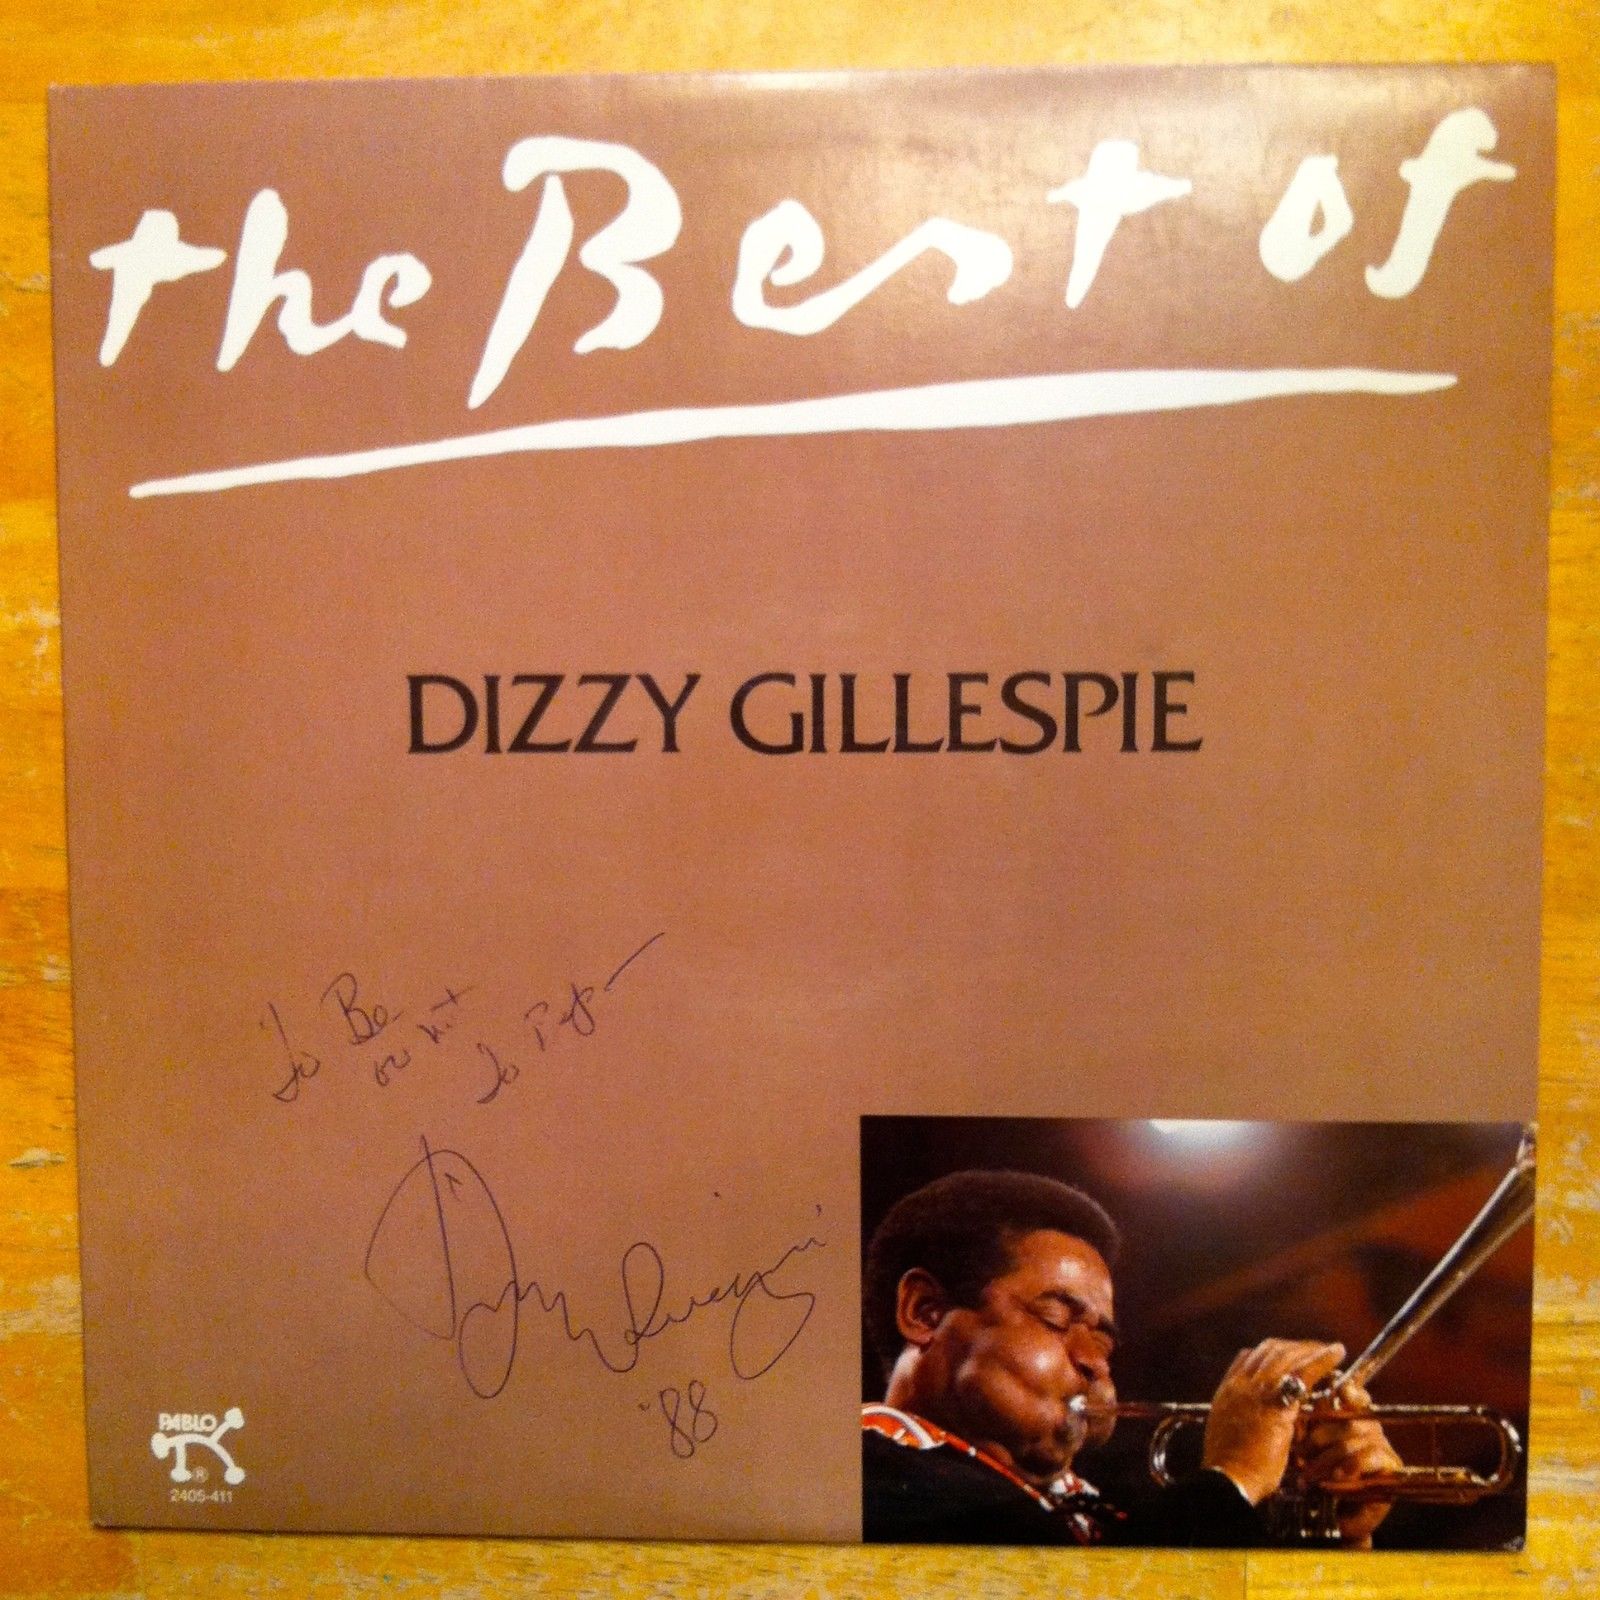 The Best of Dizzy Gillespie, 1980 Pablo LP Signed by Dizzy